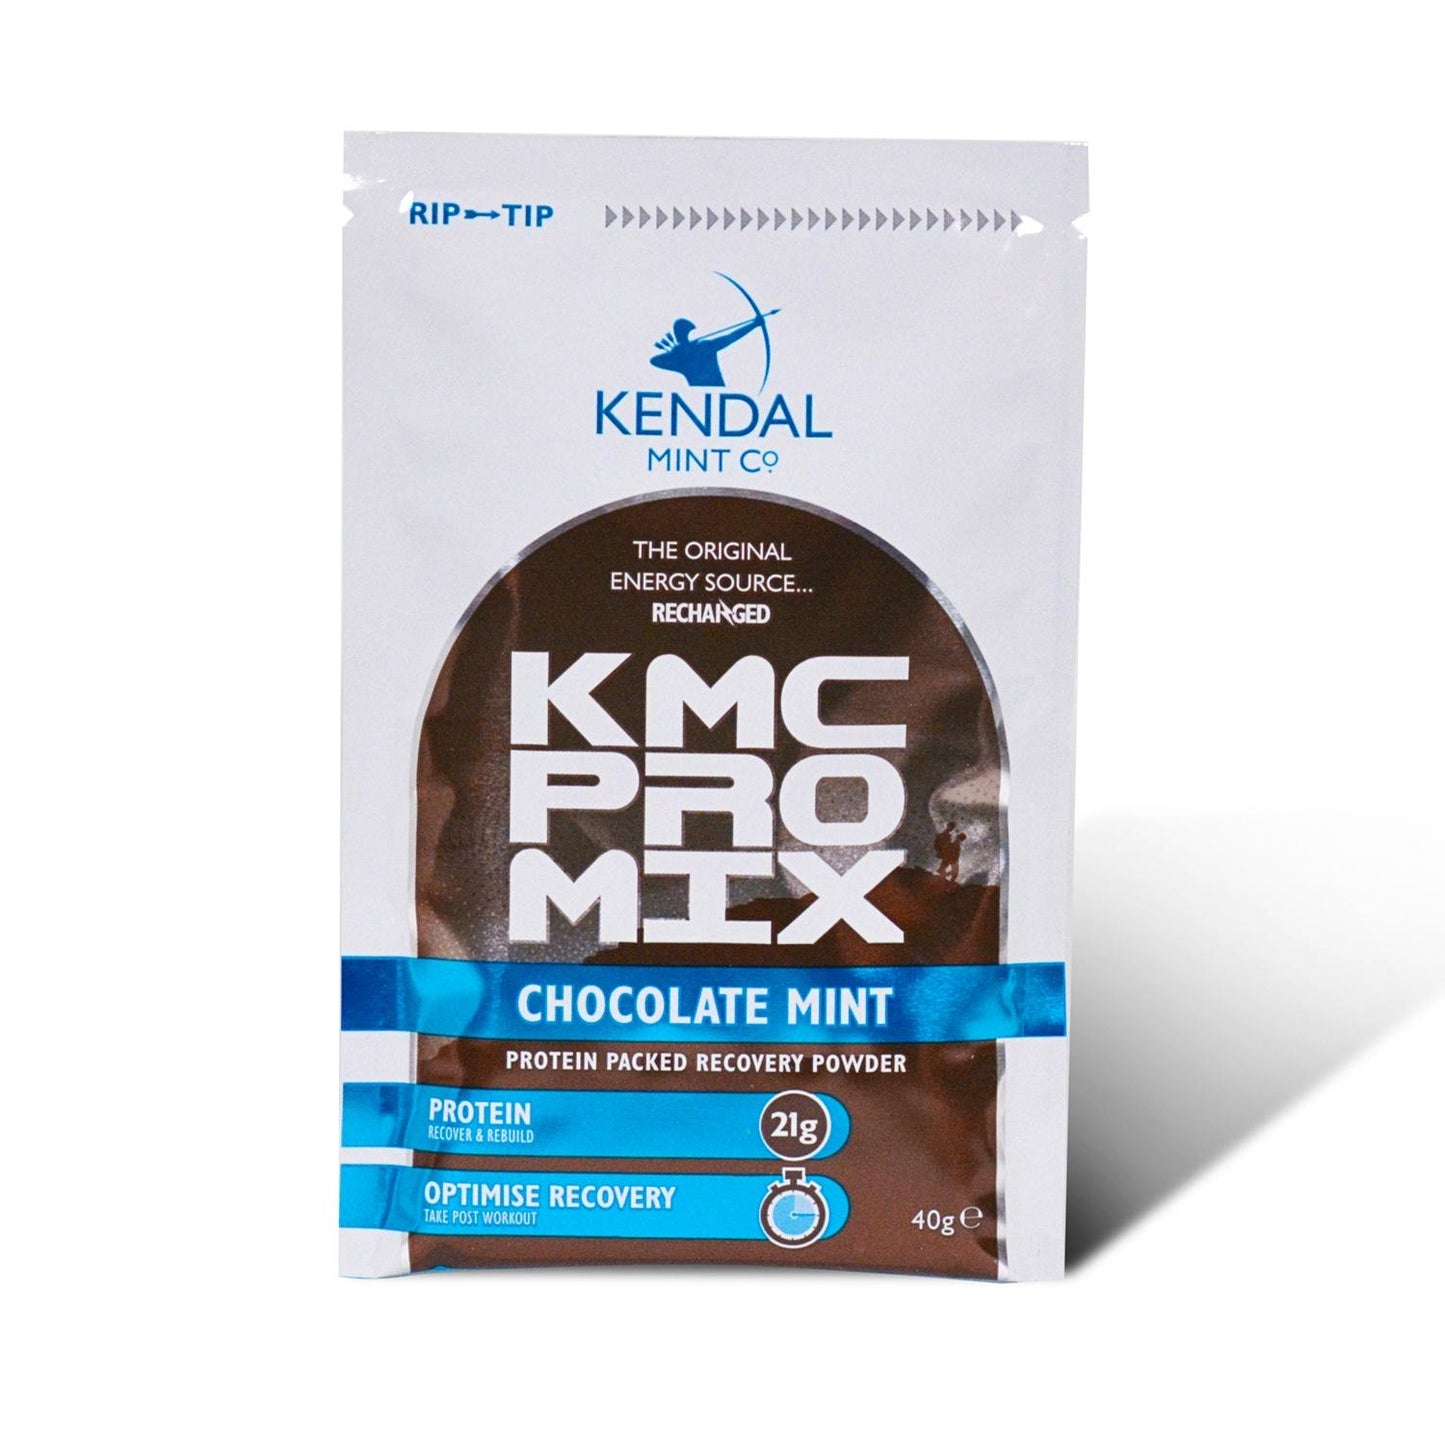 KMC PRO MIX Whey Protein Recovery Powder | Chocolate Mint Flavour (Clearance)